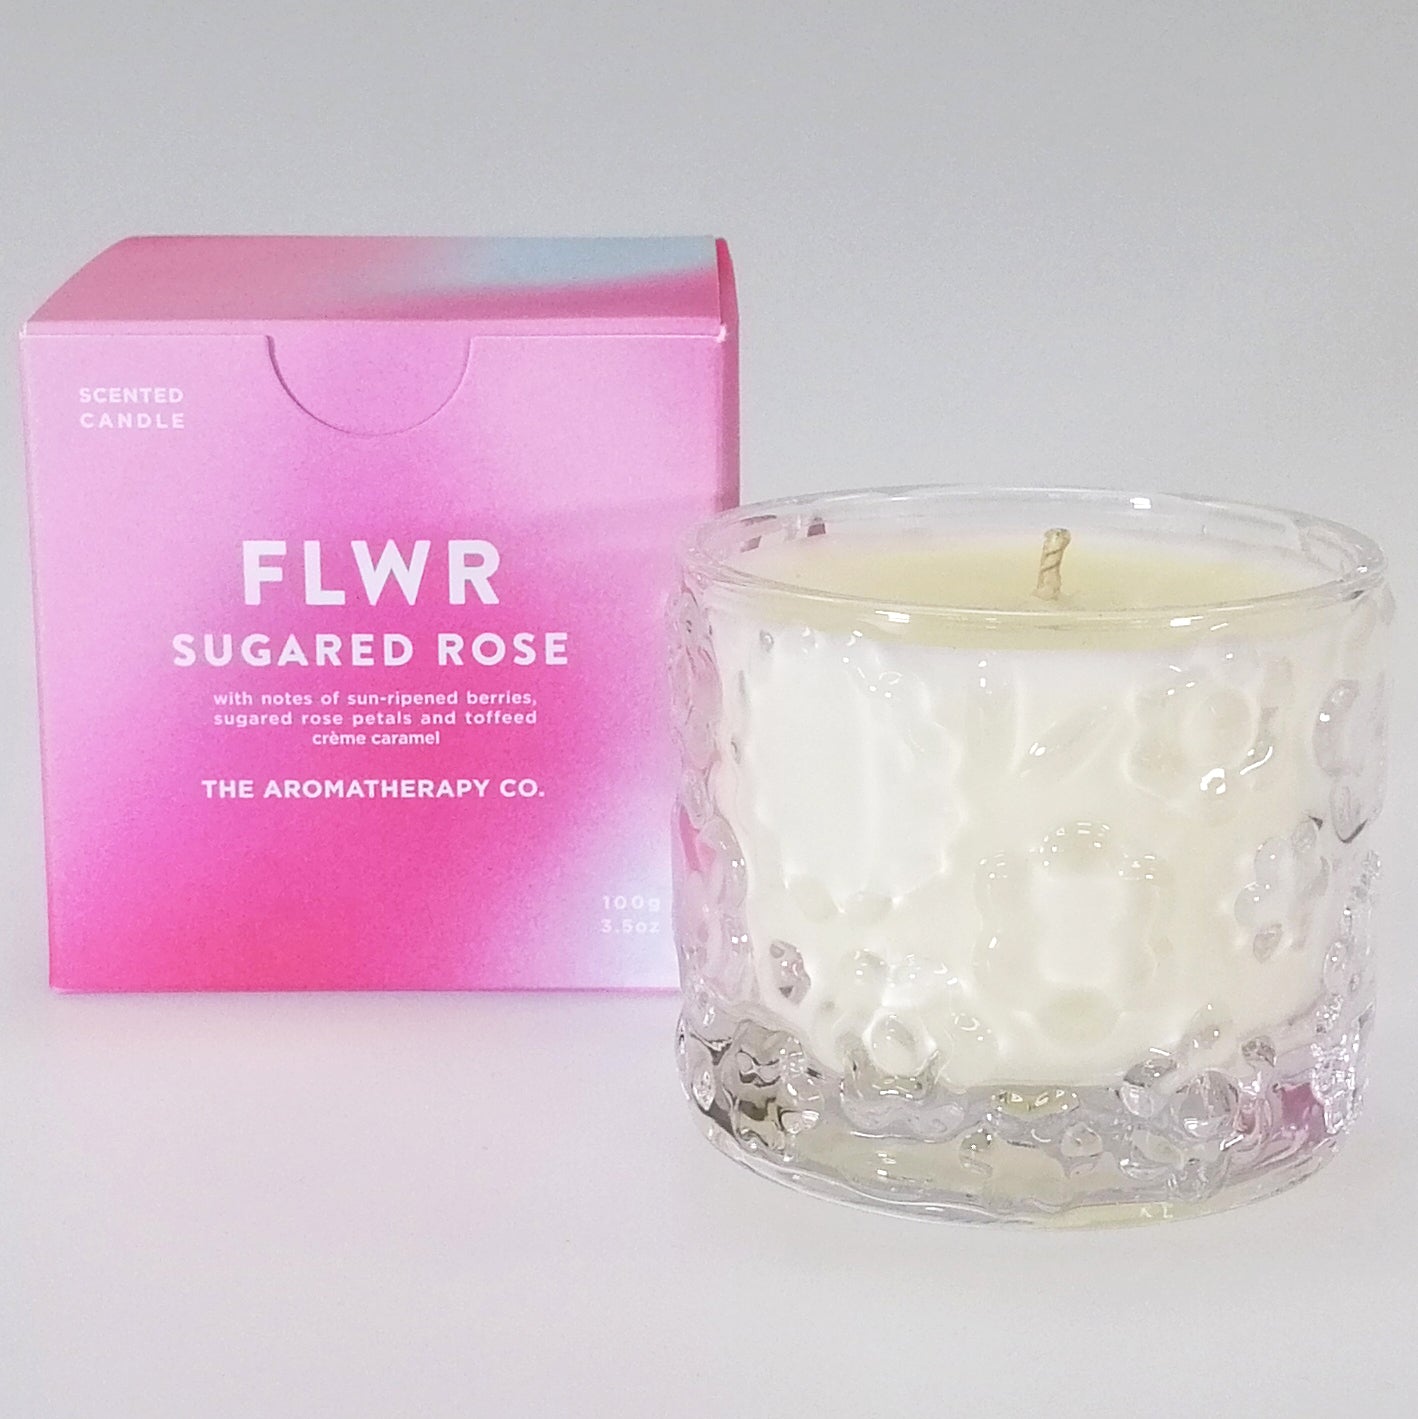 The Aromatherapy Co. FLWR Candle - Sugared Rose